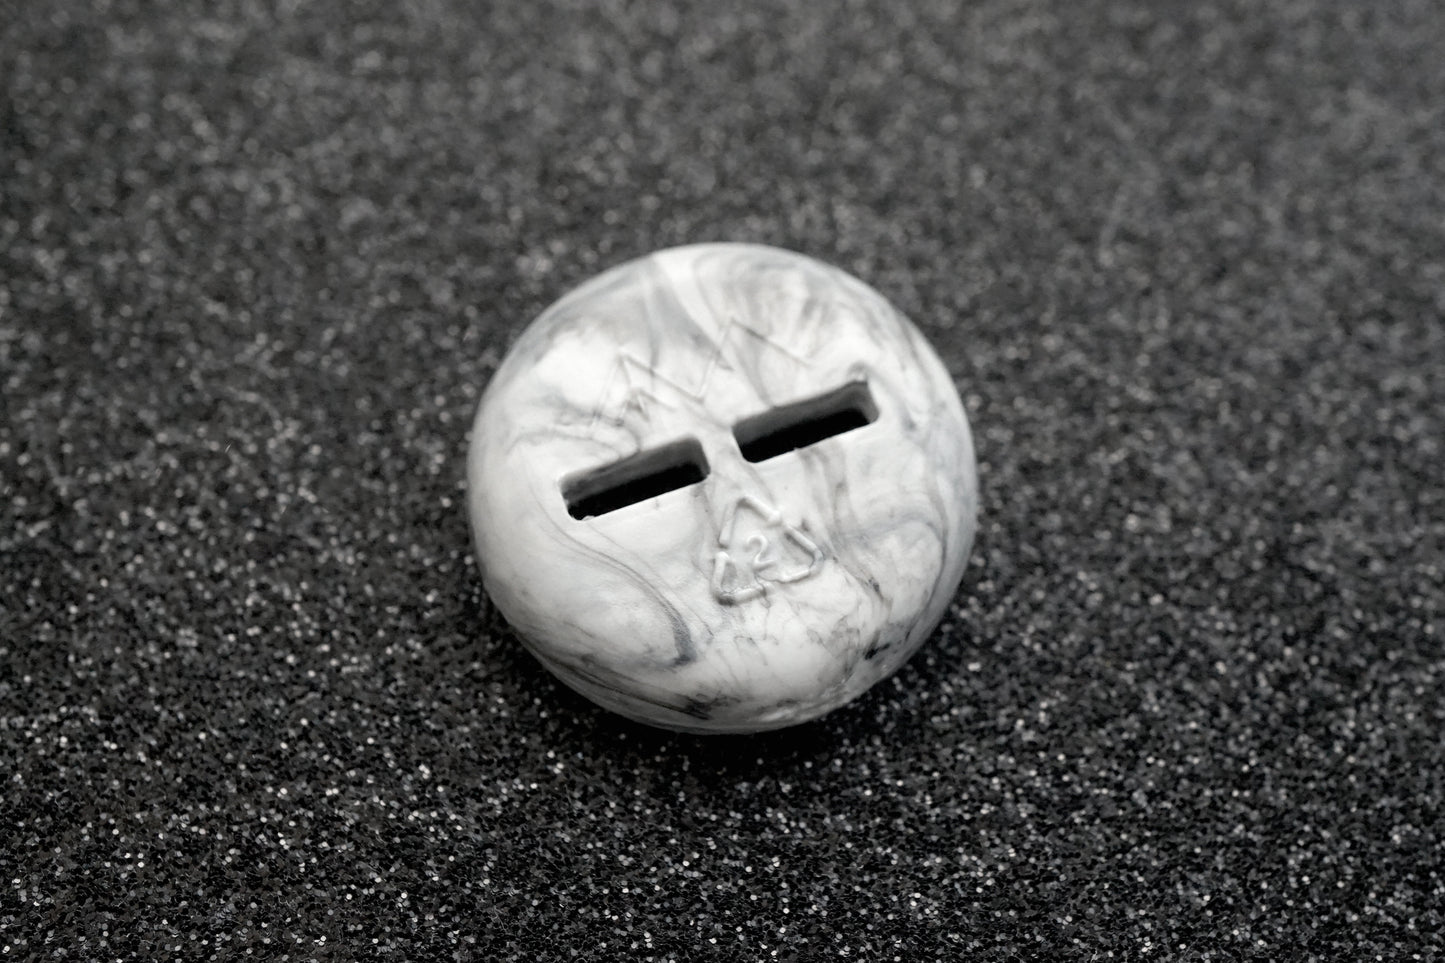 The Marble Button